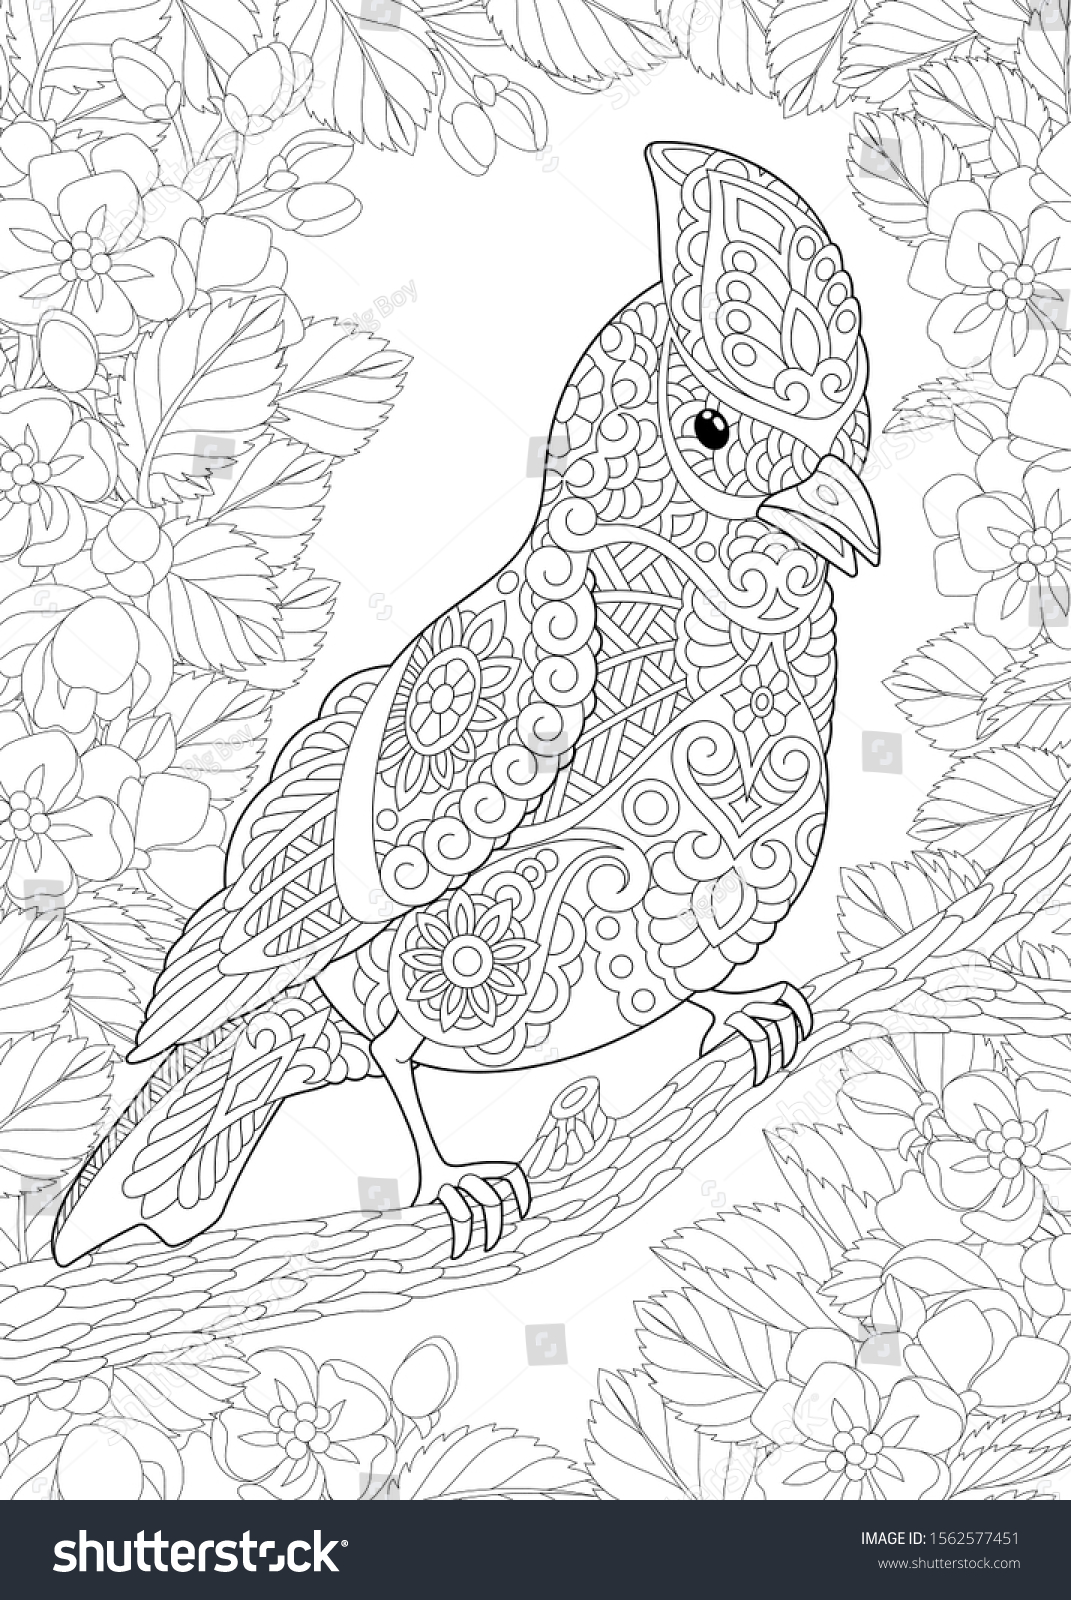 Coloring Page Coloring Picture Beautiful Bird Stock Vector ...